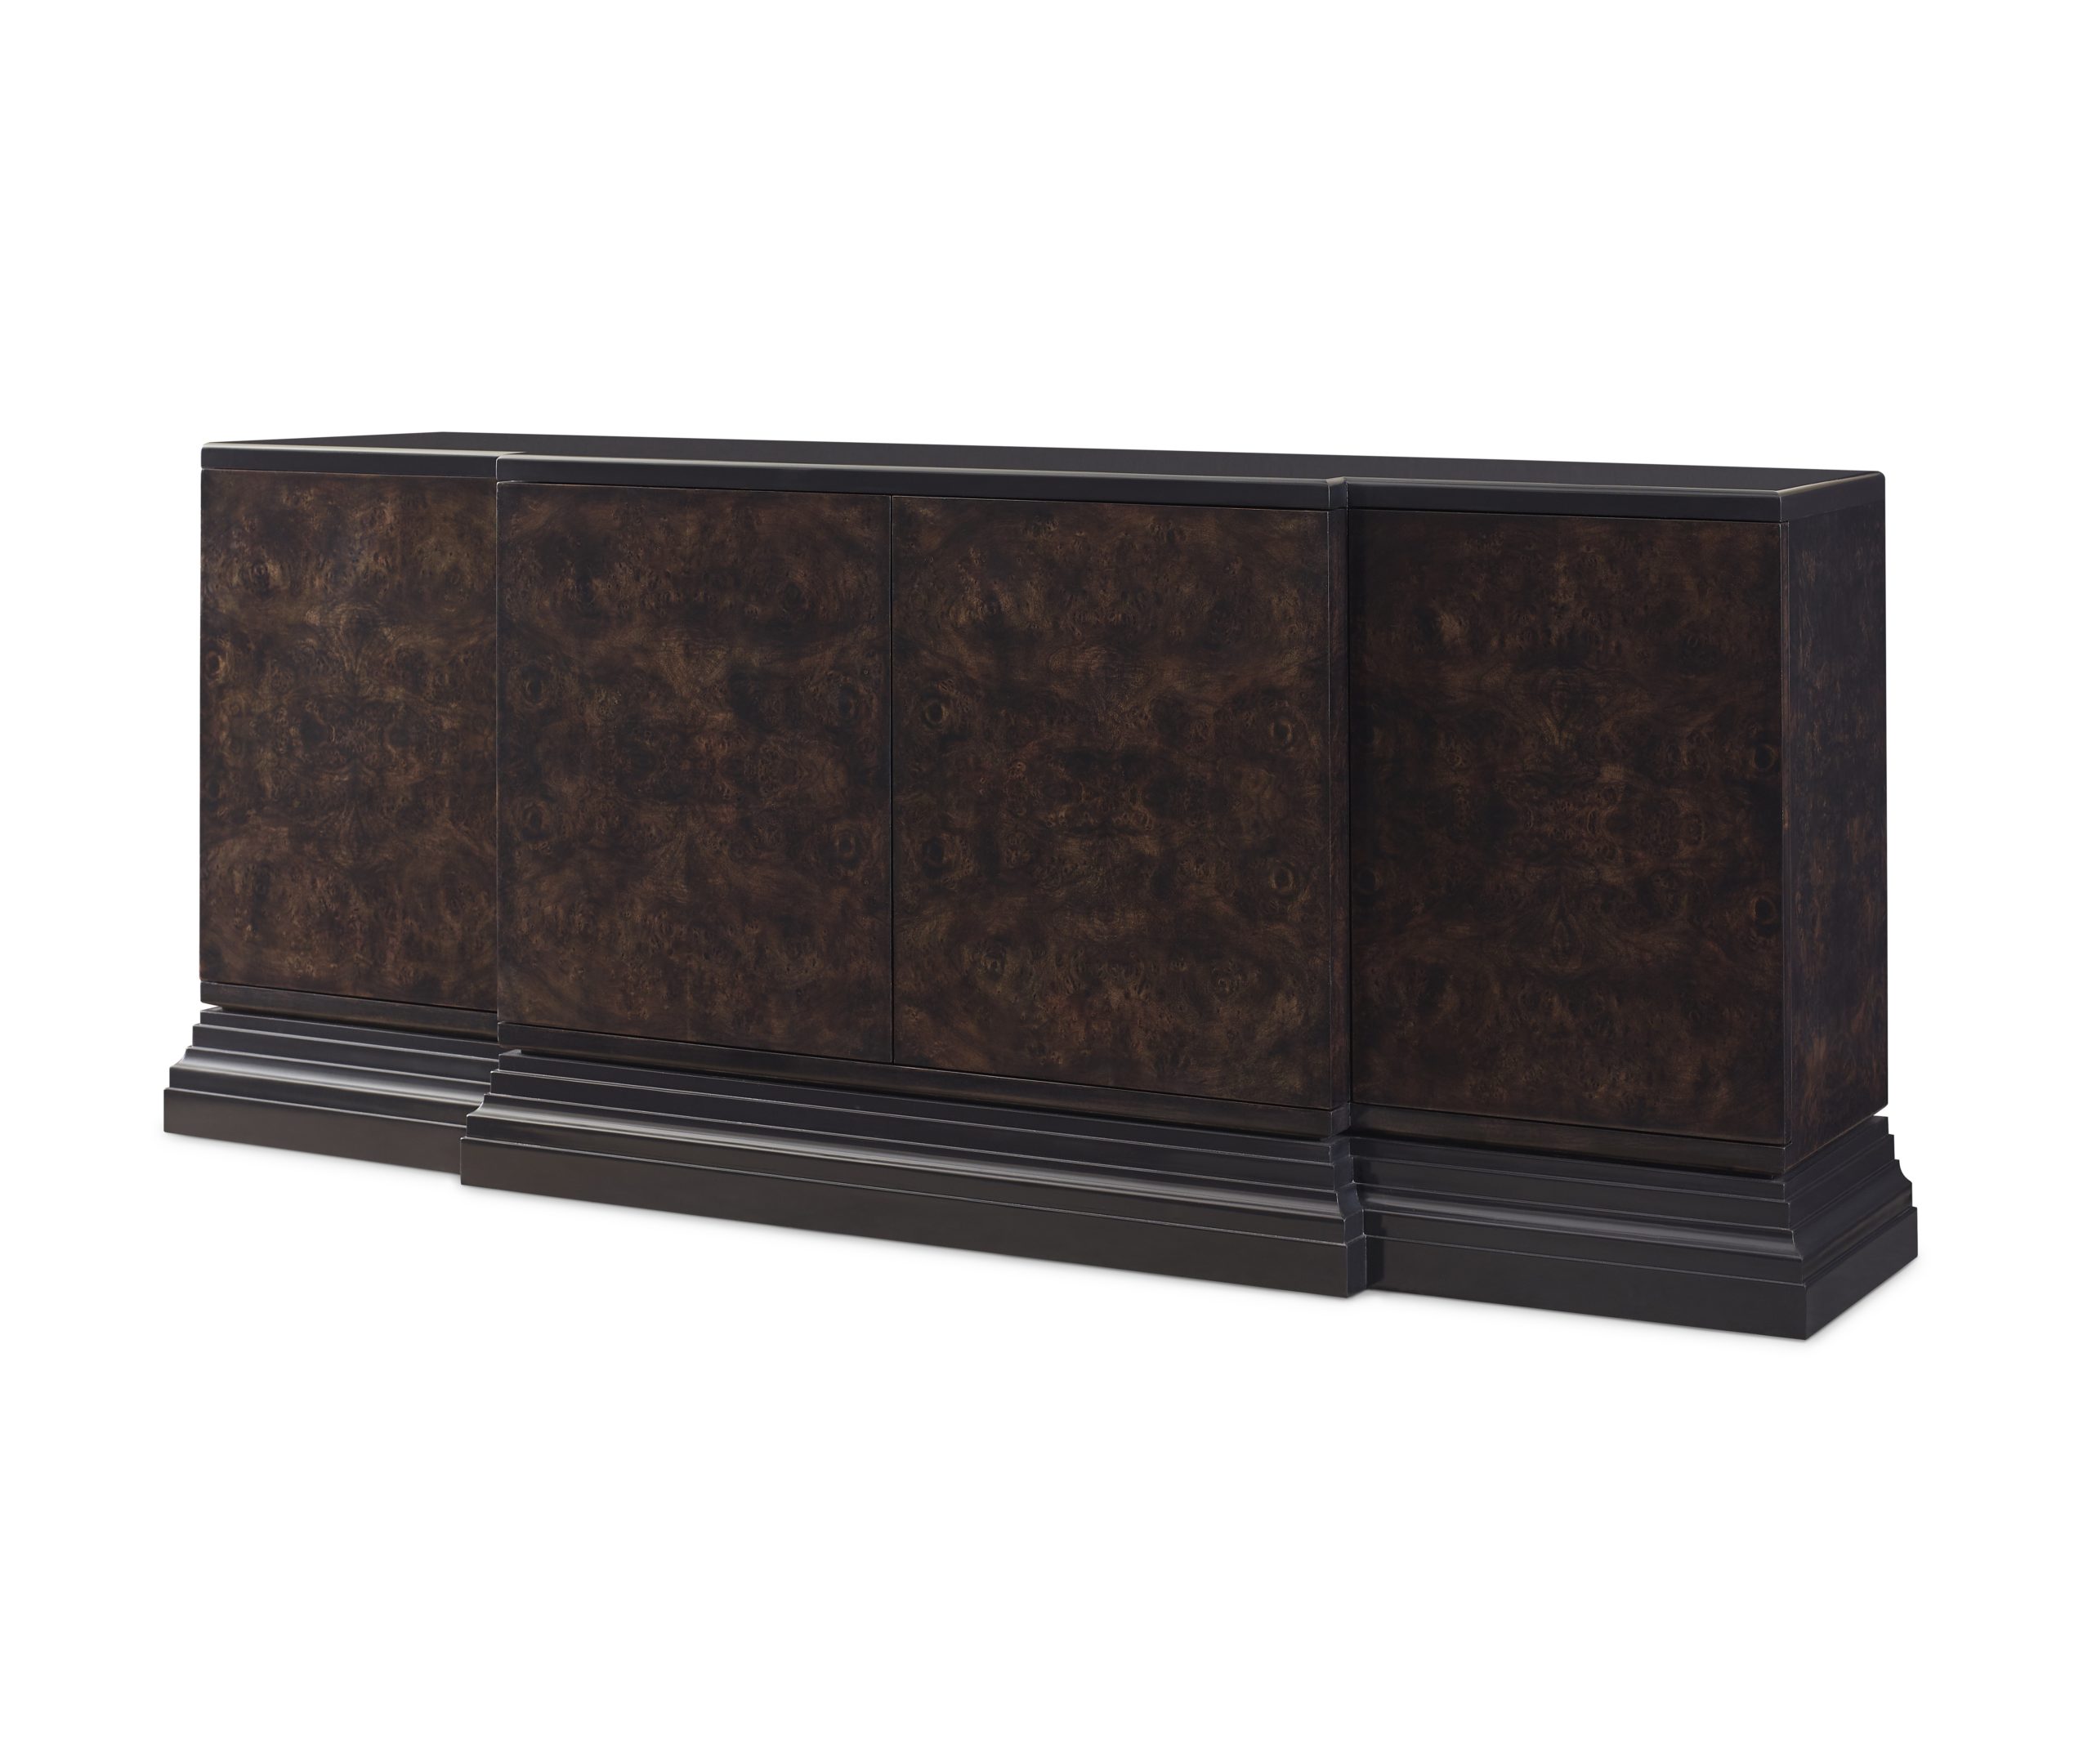 Baker_products_WNWN_maximus_credenza_BAA3030_FRONT_3QRT-scaled-1